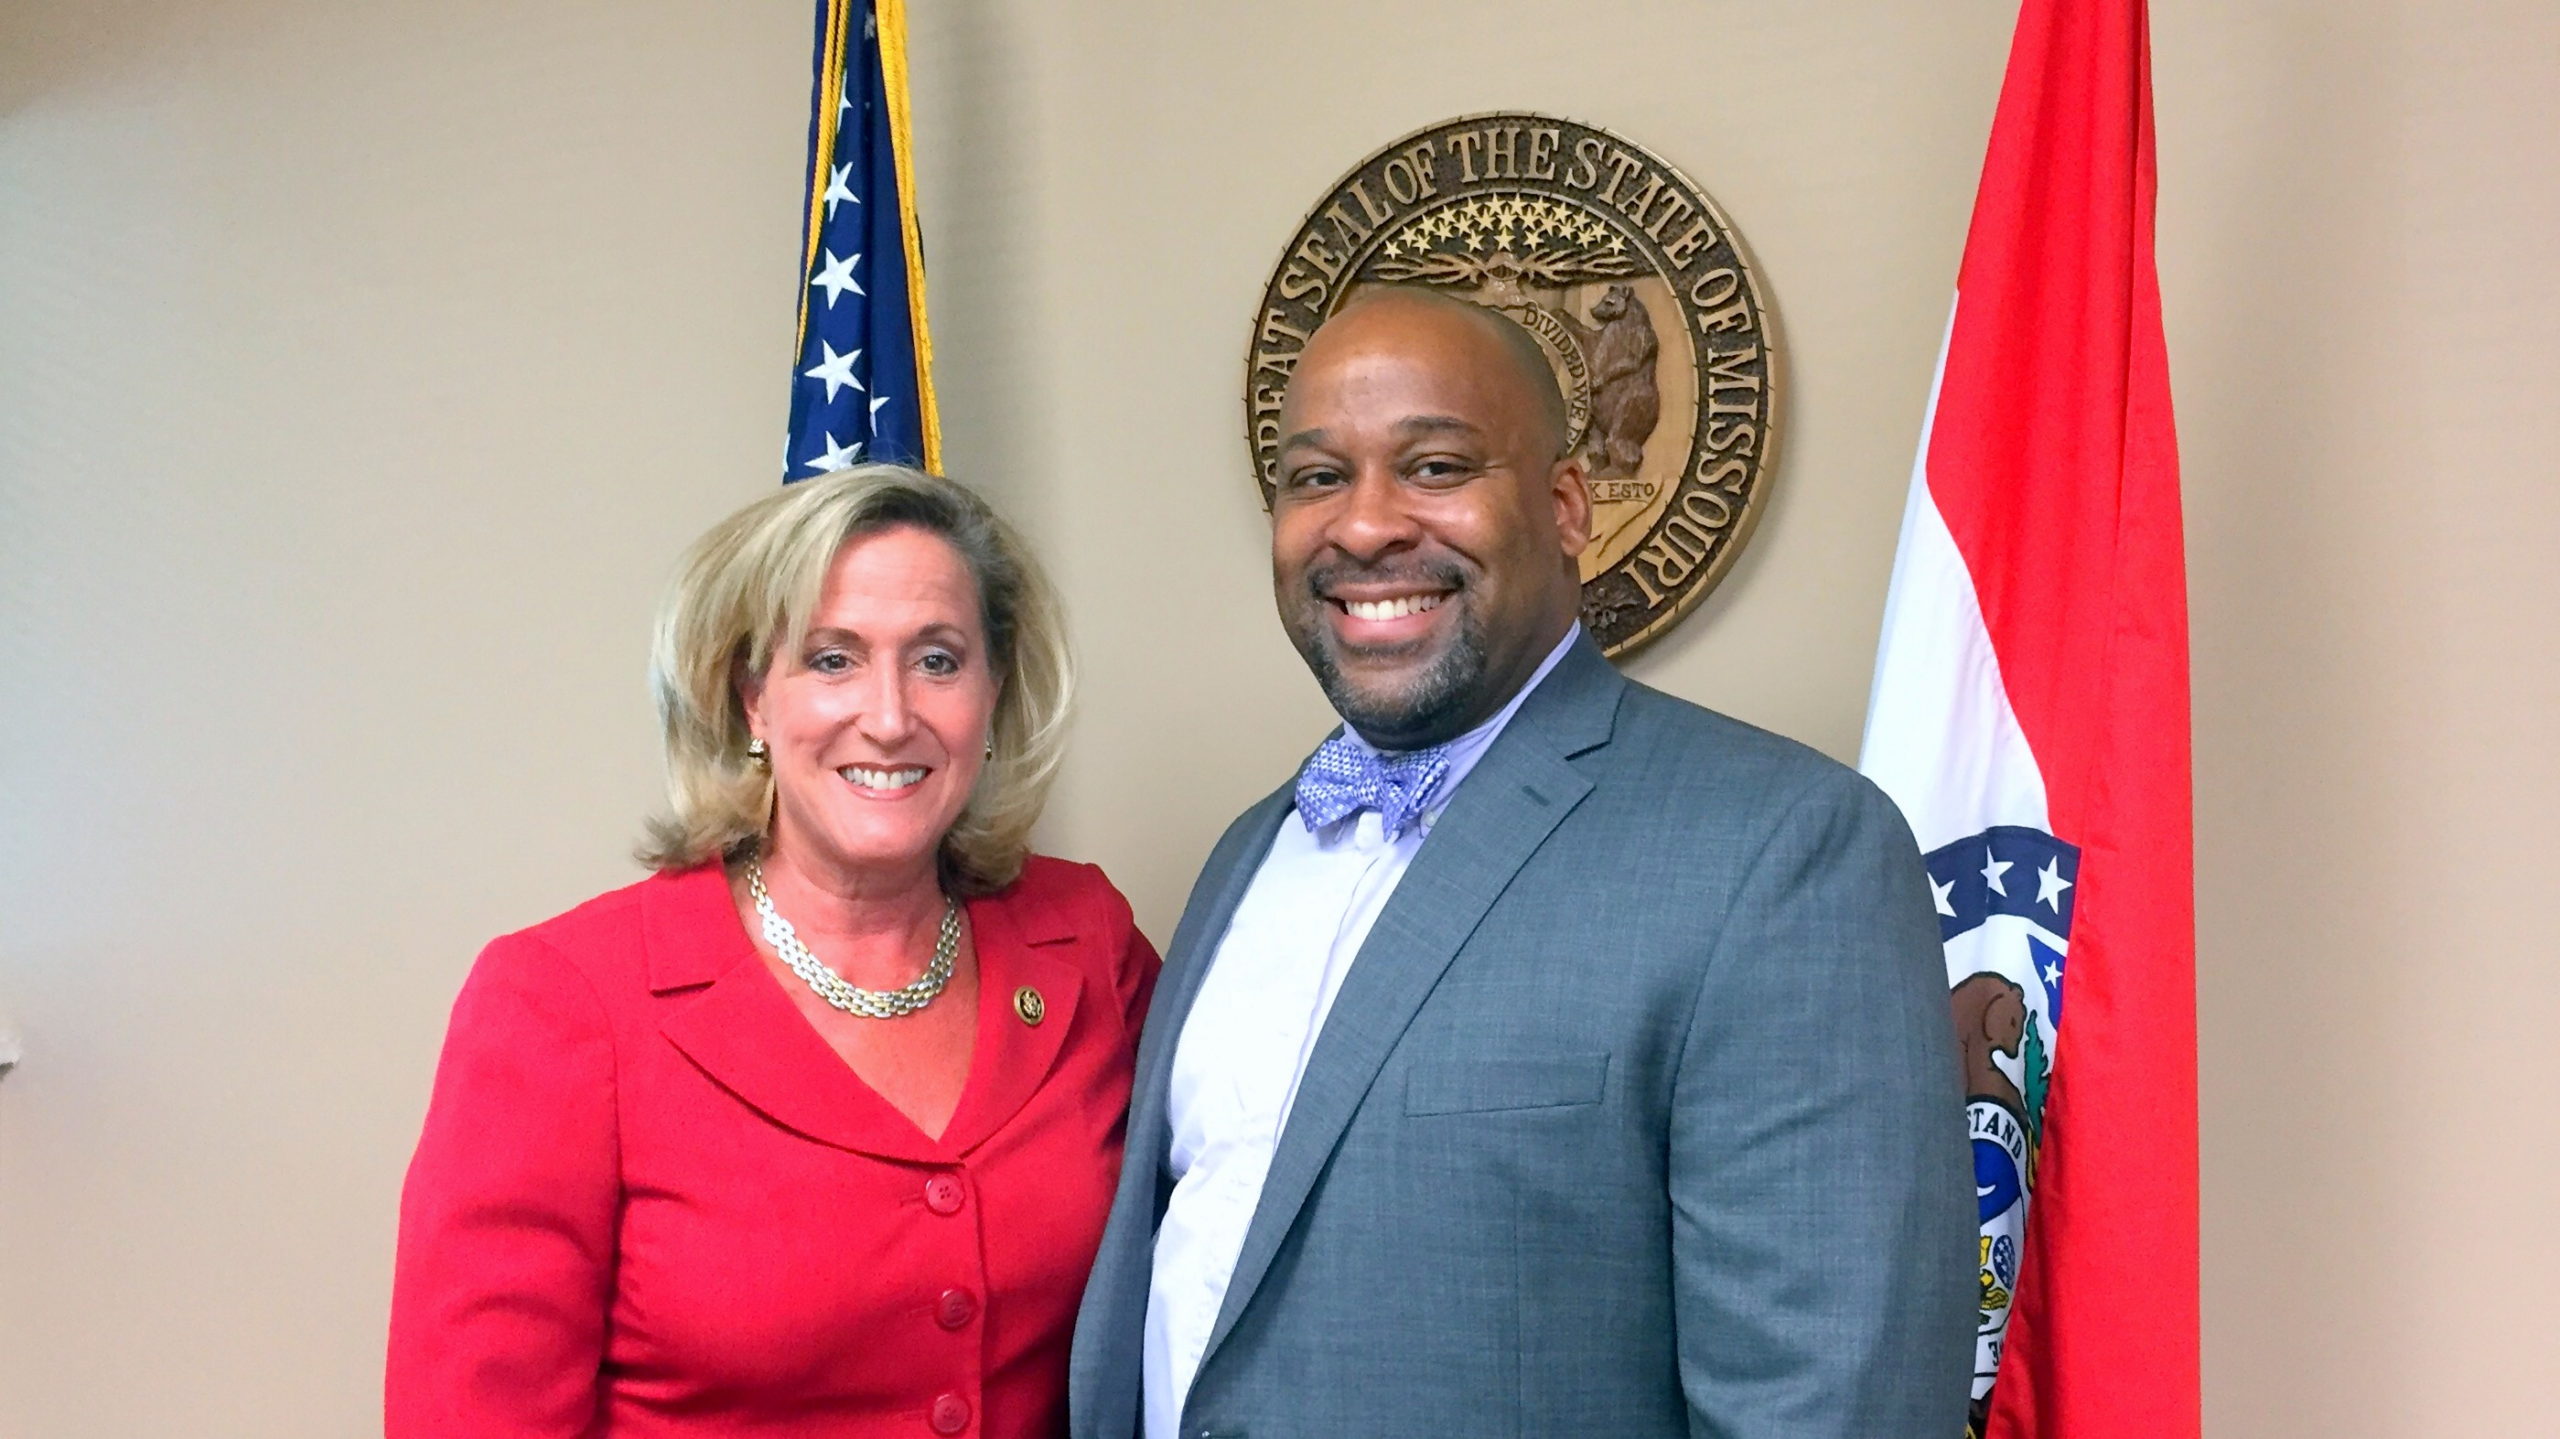 Rep. Ann Wagner (R-MO) and Brandon Martin, PharmD, pharmacy manager of the Ladue, Mo. Genoa, a QoL Healthcare Company, at a roundtable to discuss curbing opioid abuse